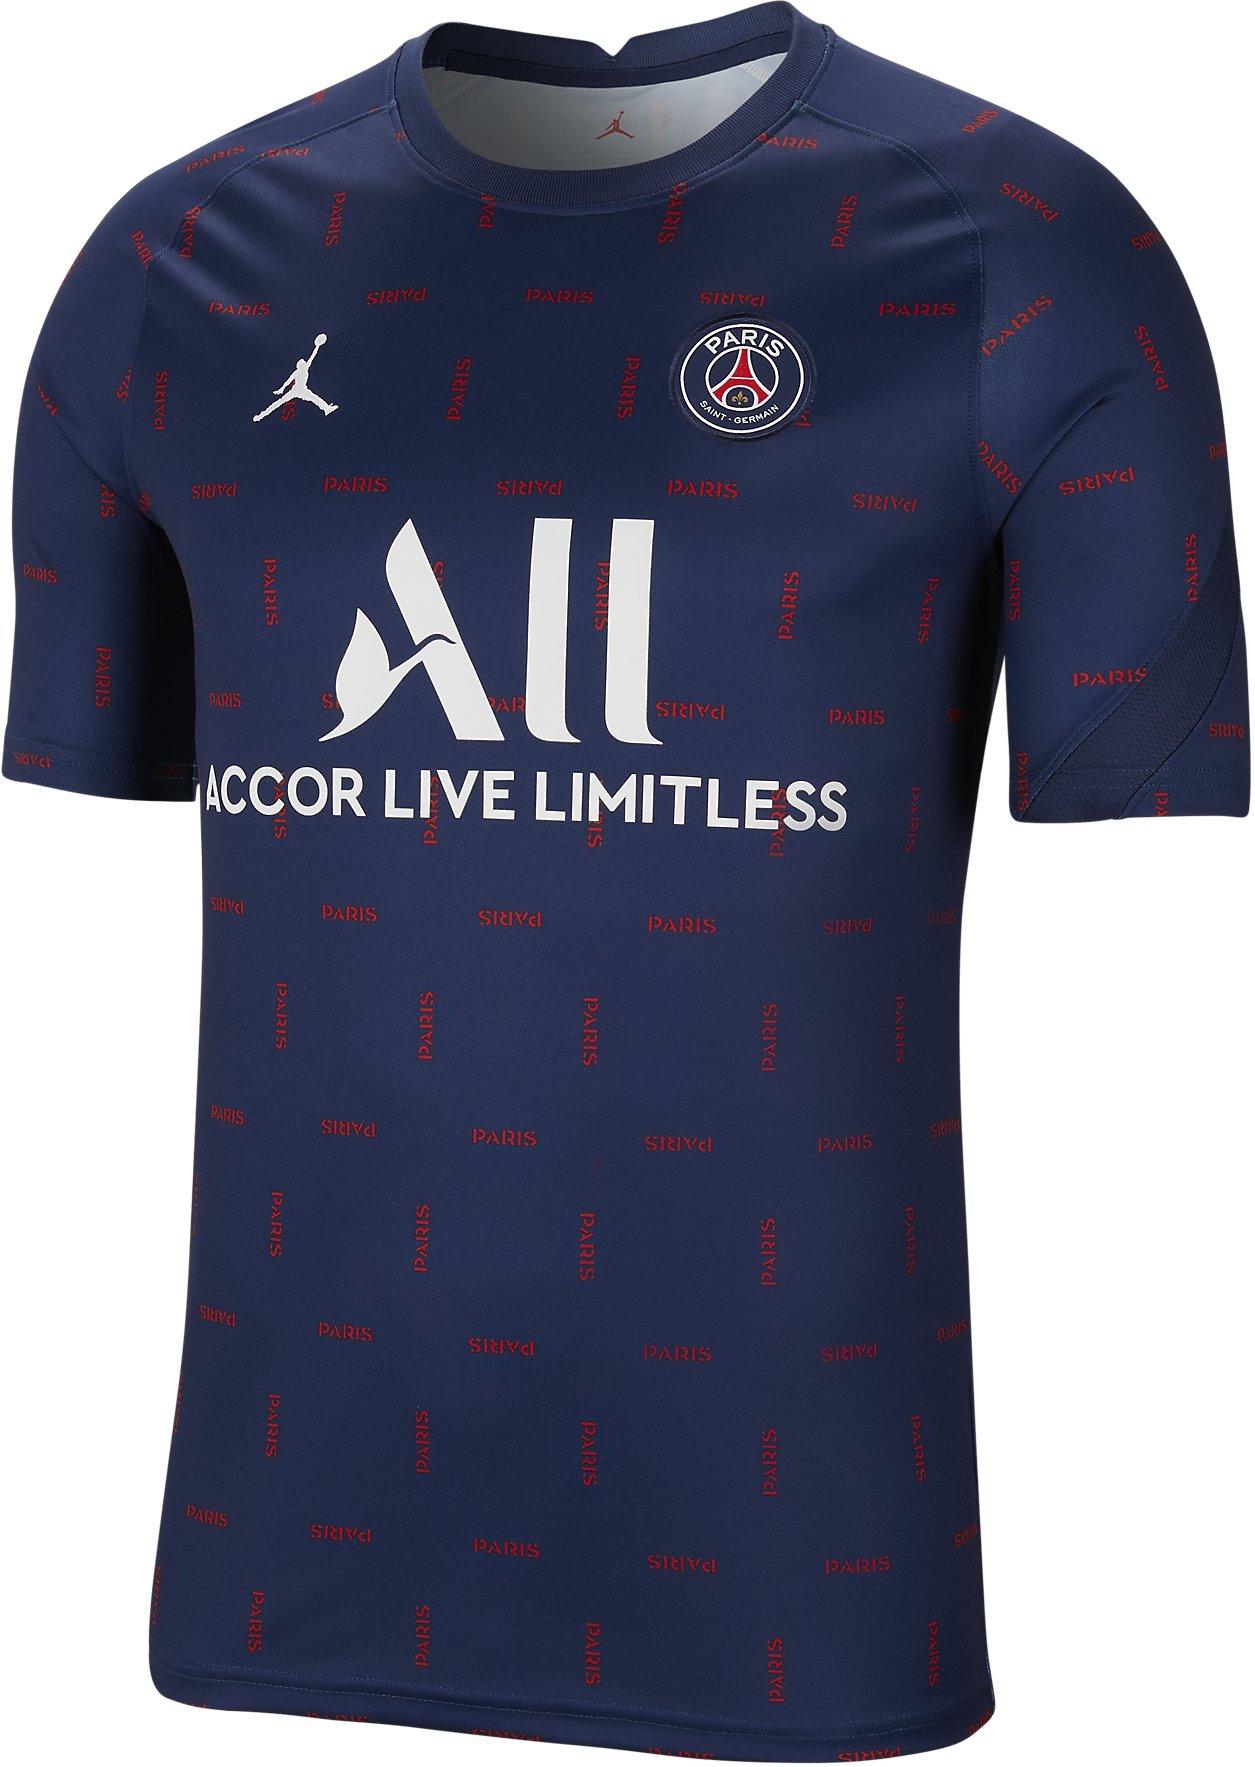 Wearing this PSG X LV shirt all summer 🤩 Link in bio 🌎#psg #psgfans